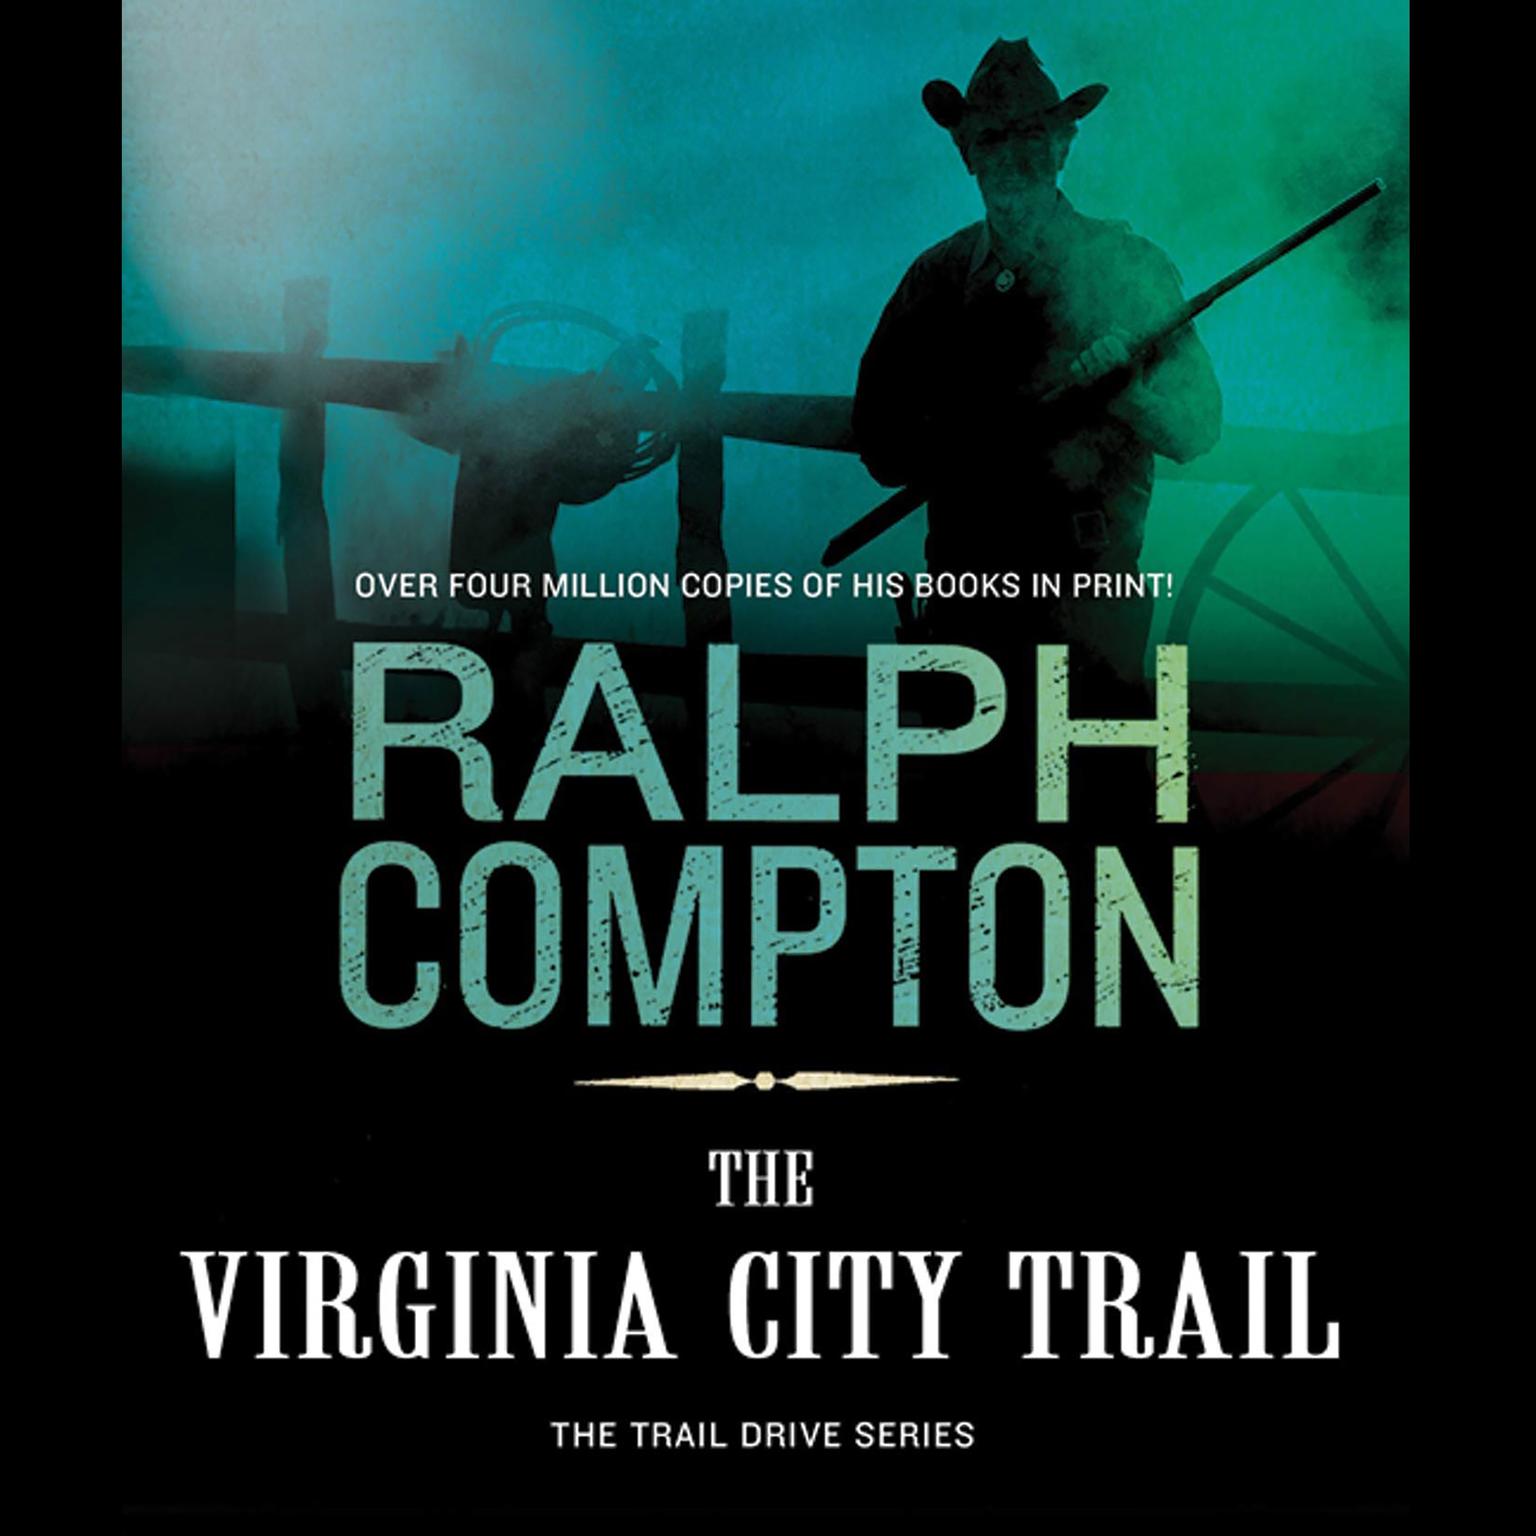 The Virginia City Trail (Abridged): The Trail Drive, Book 7 Audiobook, by Ralph Compton